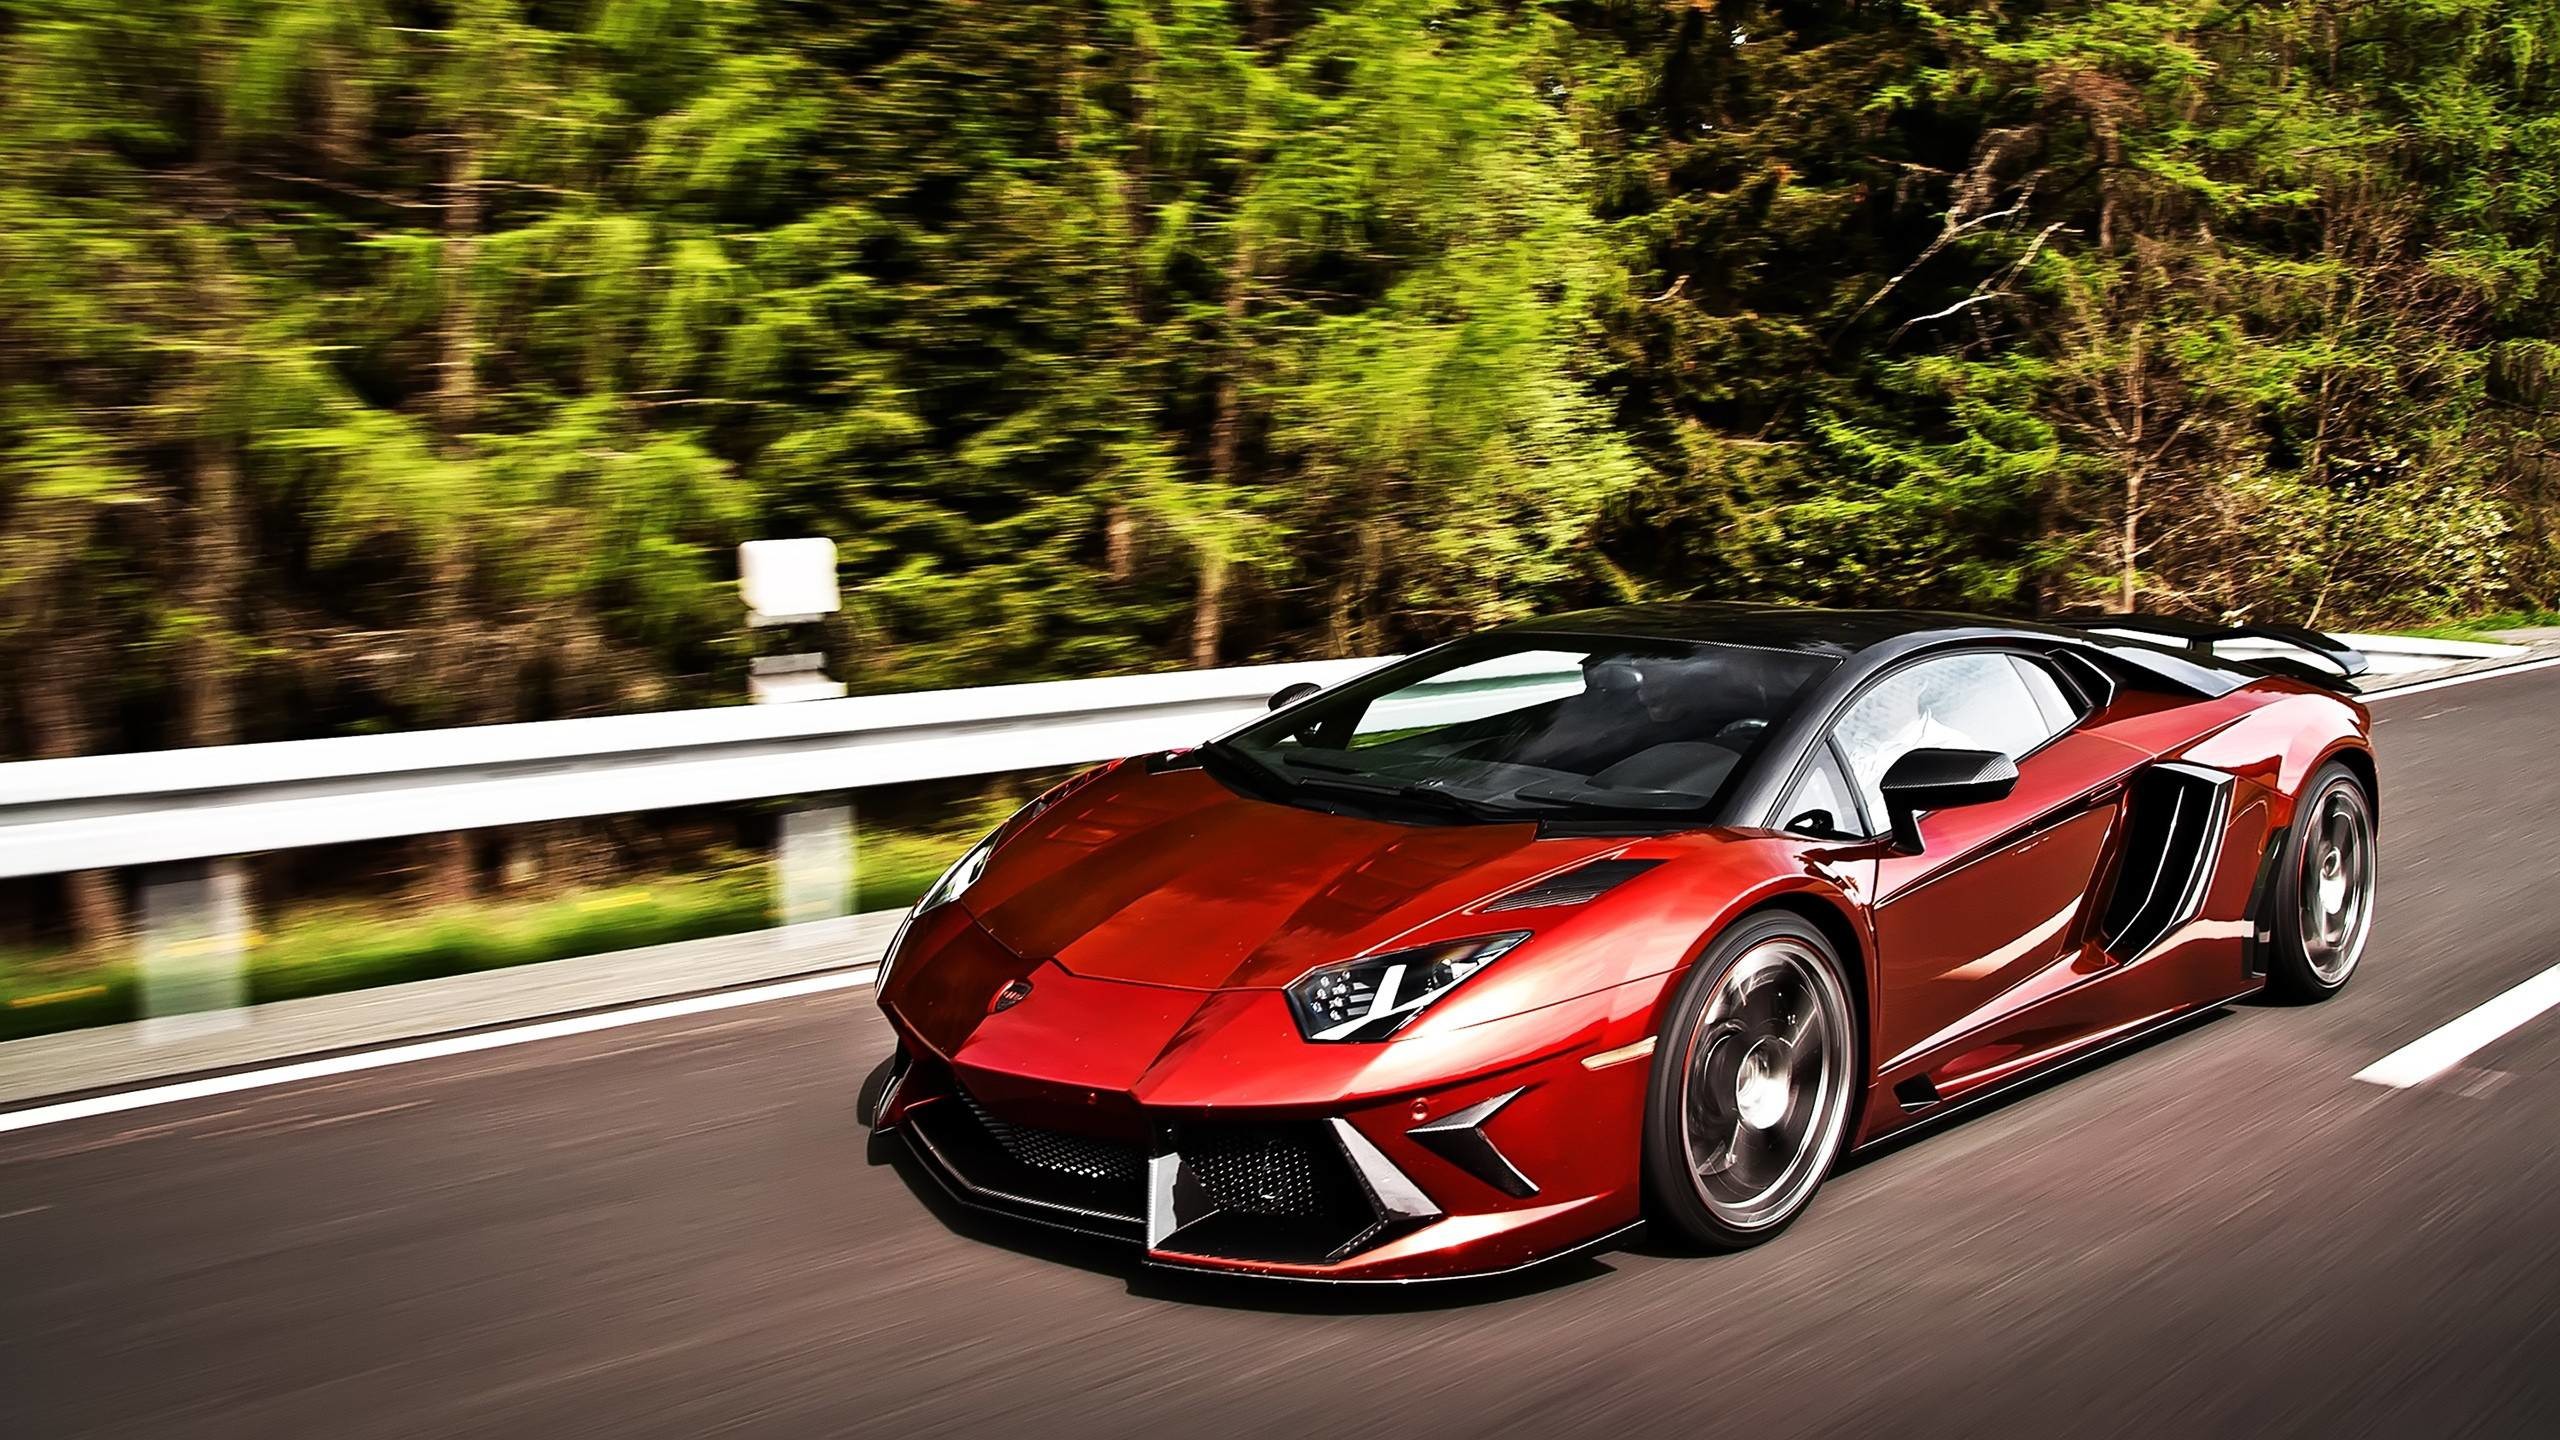 2560x1440 Super Cool Cars Wallpapers Images 6 HD Wallpapers | lzamgs.